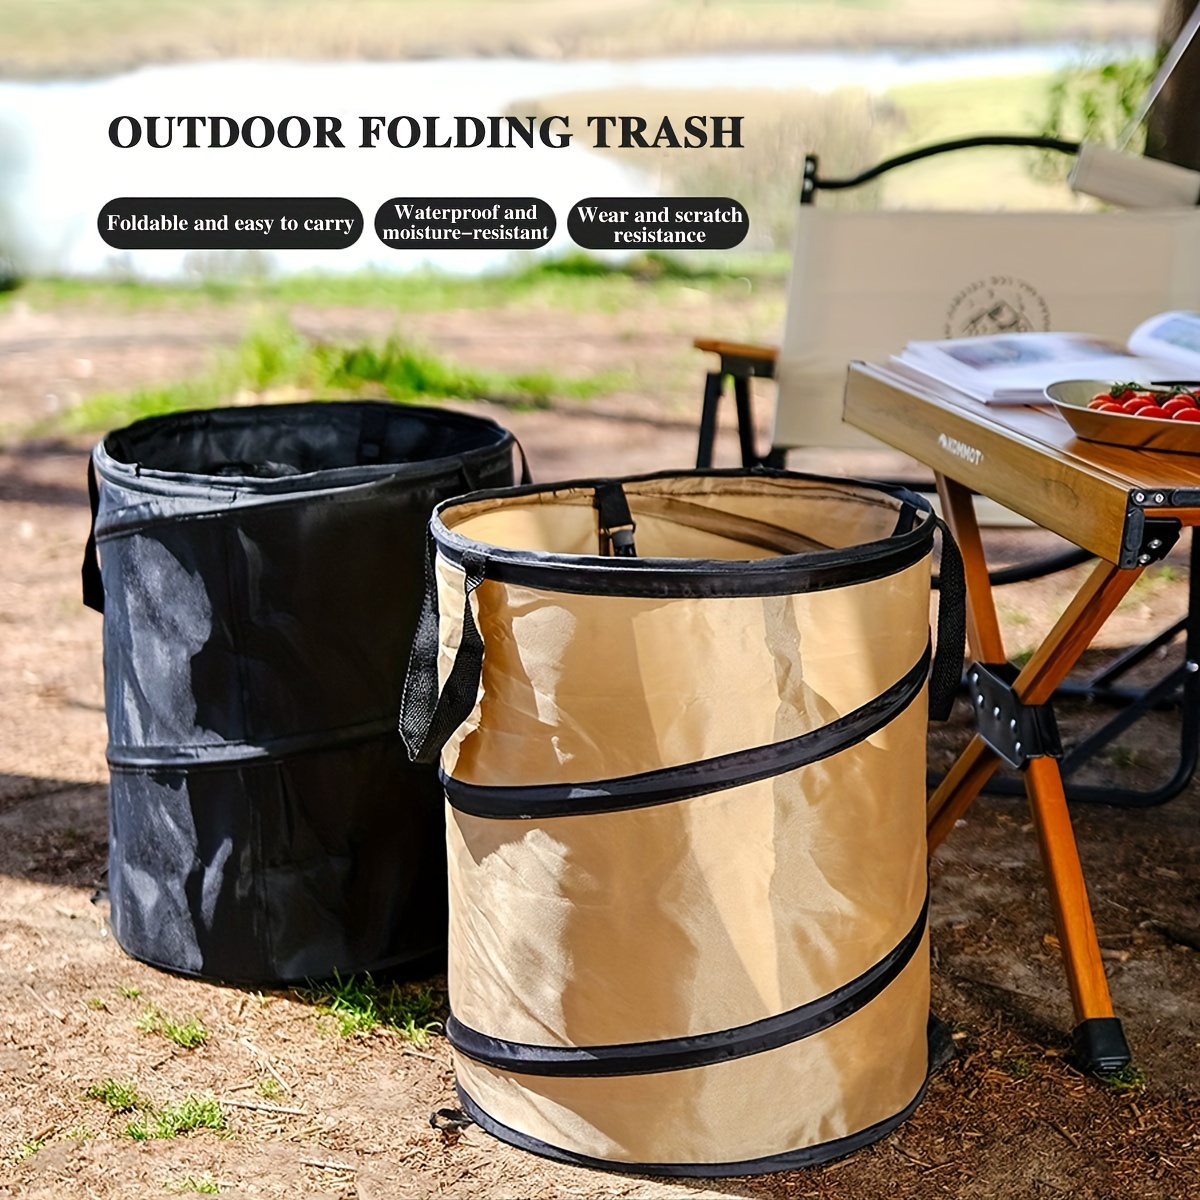 

1pc Pop-up Trash Can, Outdoor Portable Camping Folding Trash Can Camping Trash Can Gardening Garden Garbage Bag Garden Leaf Bucket